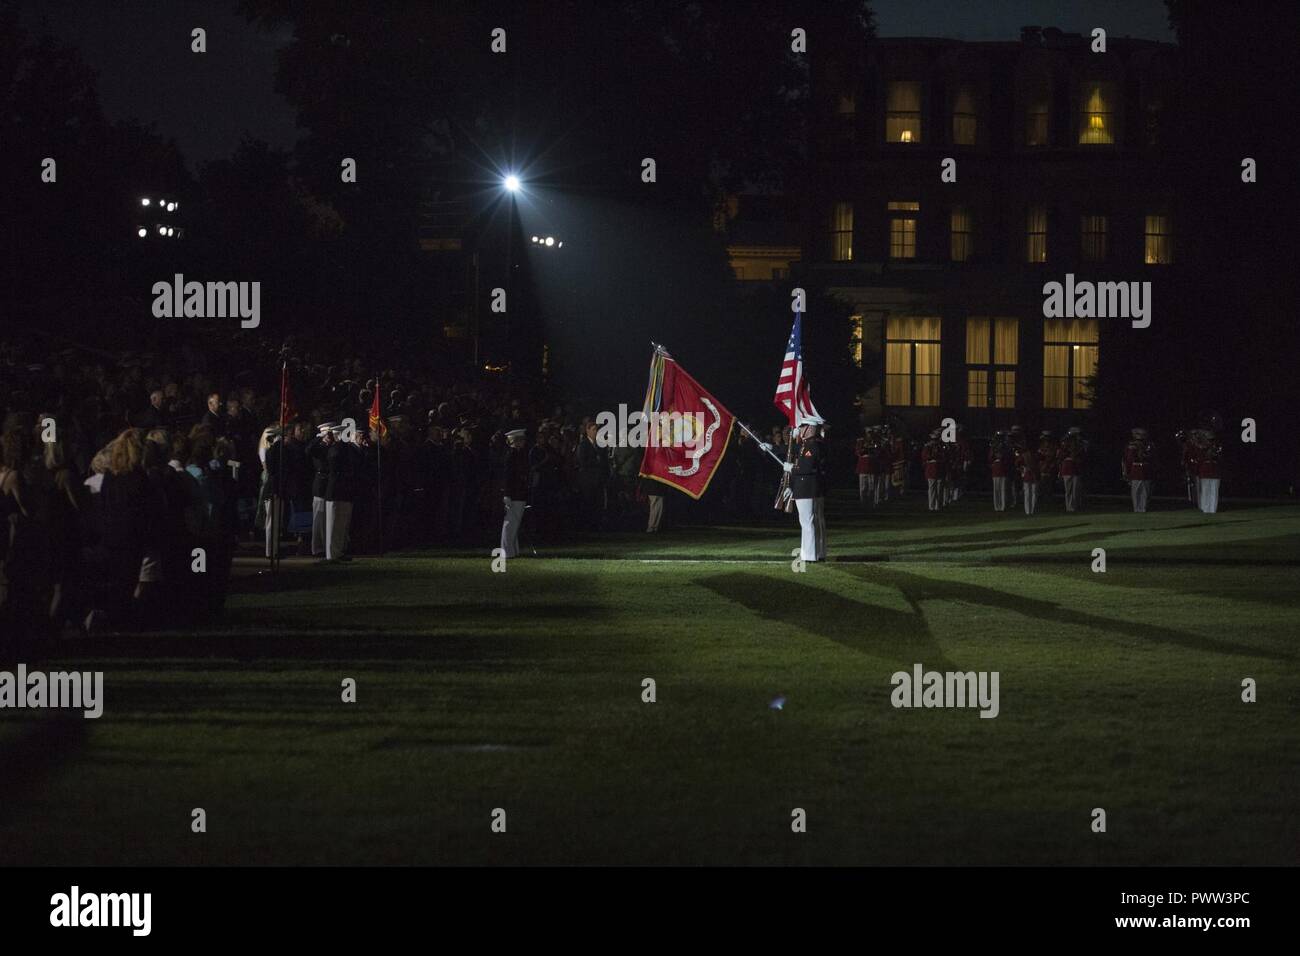 U.S. Marines with the official Marine Corps Color Guard present colors during an evening parade at Marine Barracks Washington, Washington, D.C., June 23, 2017. Evening parades are held as a means of honoring senior officials, distinguished citizens and supporters of the Marine Corps. Stock Photo